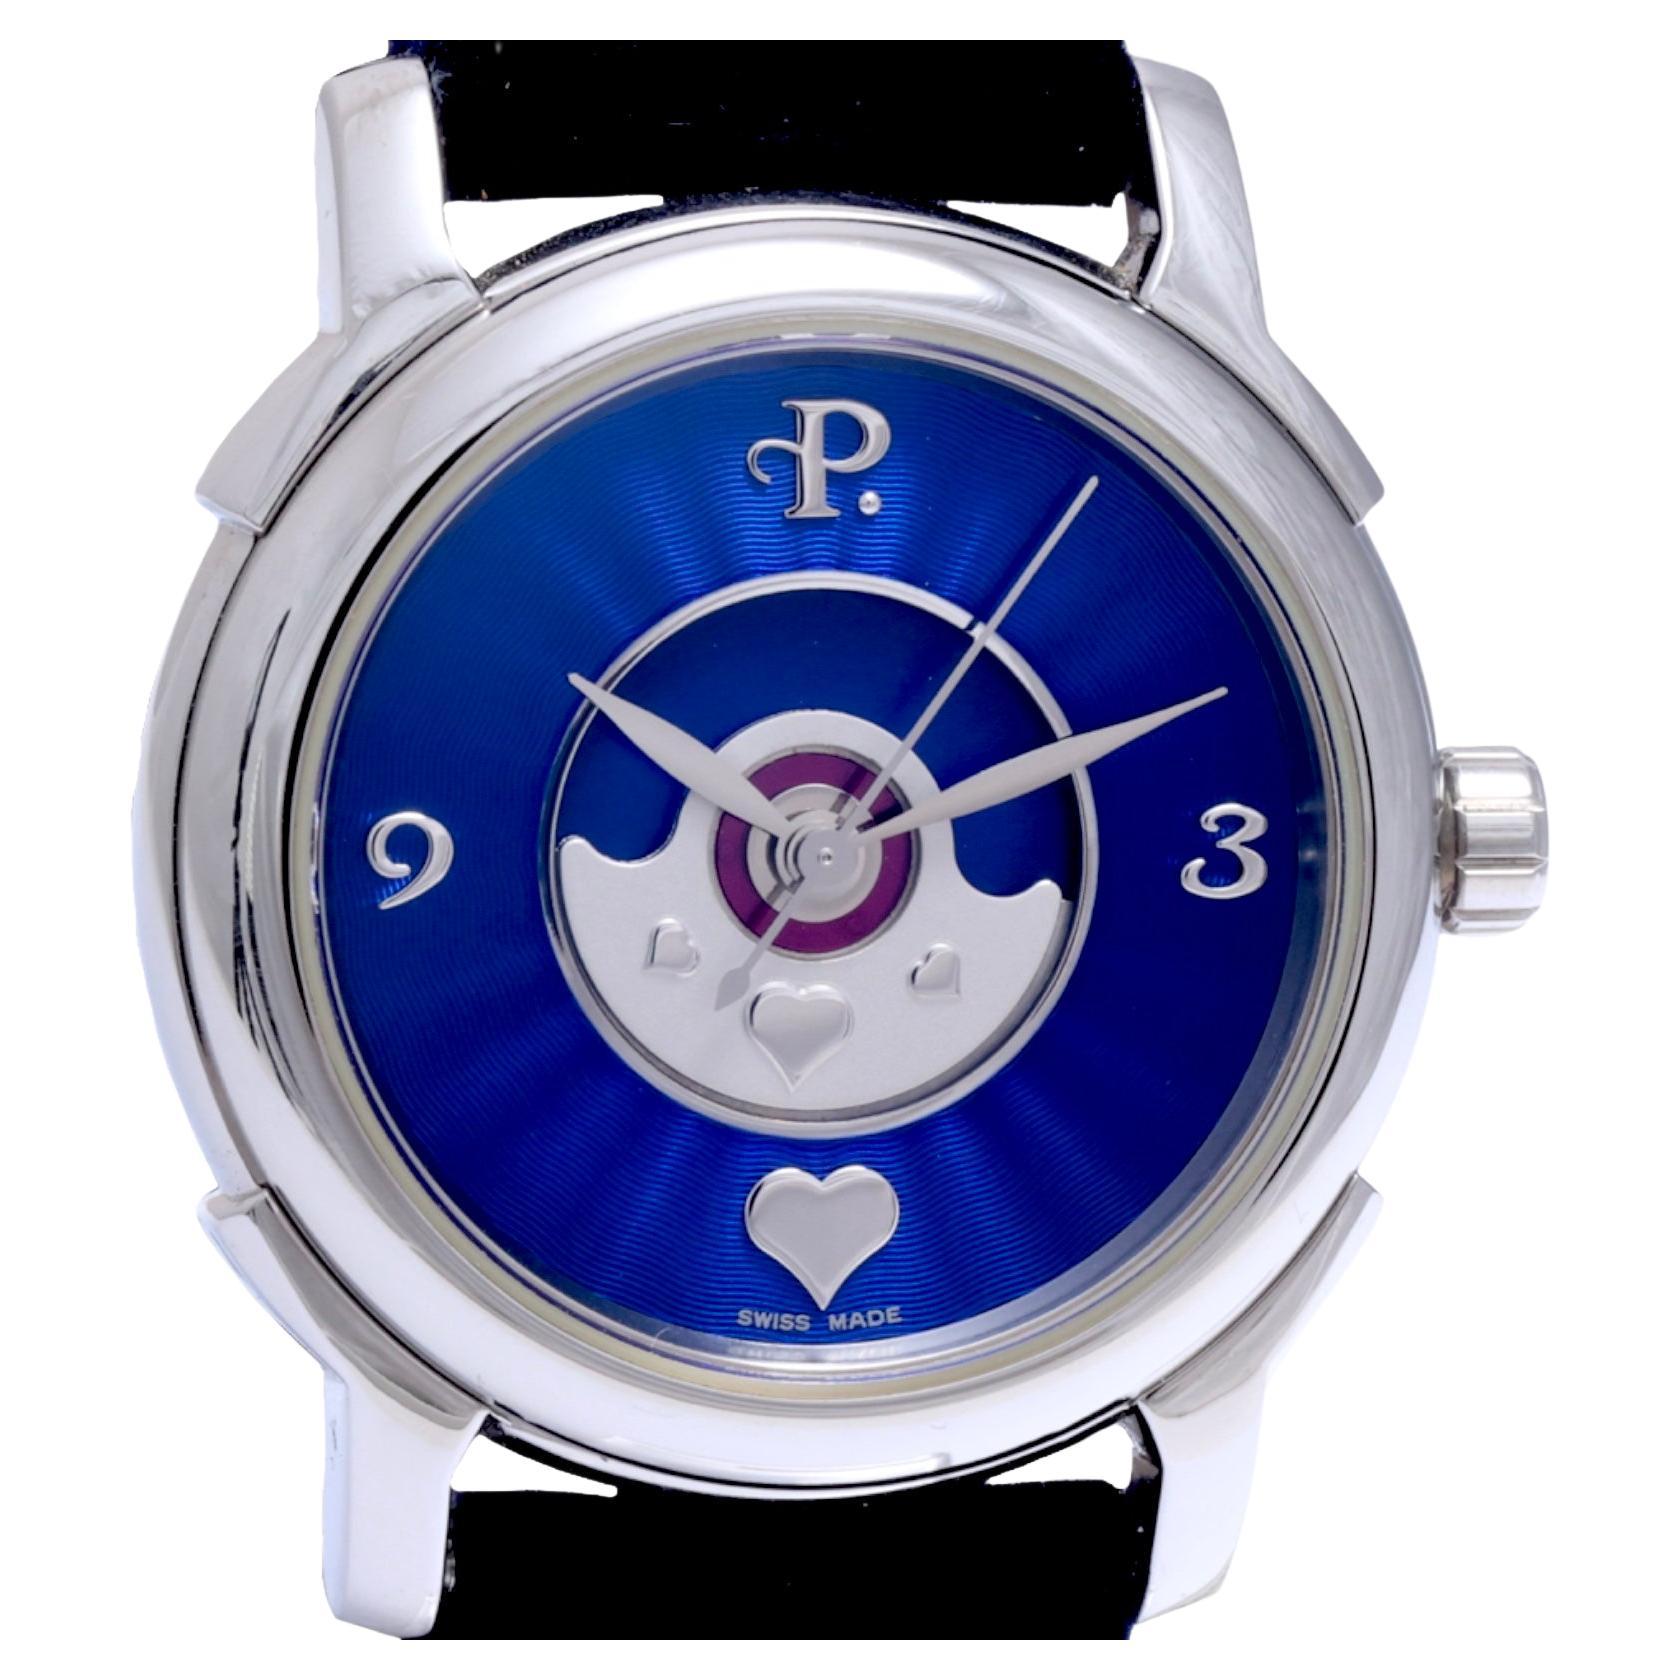 Perrelet Lady Coeur Automatic Wrist Watch Brand New In Box